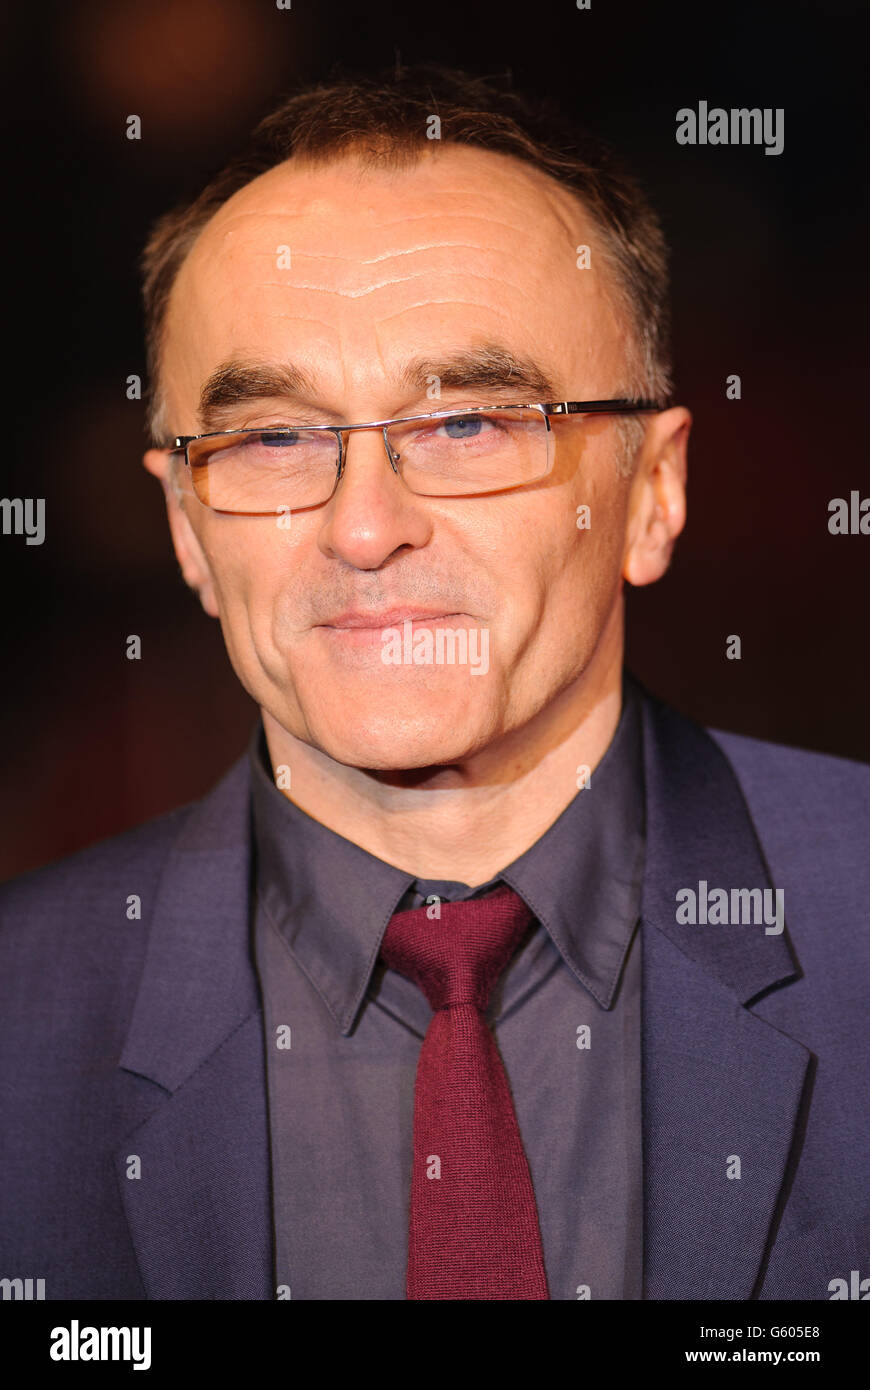 Director Danny Boyle arriving at the World Premiere of Trance, at the Odeon West End, in Leicester Square, London. Stock Photo